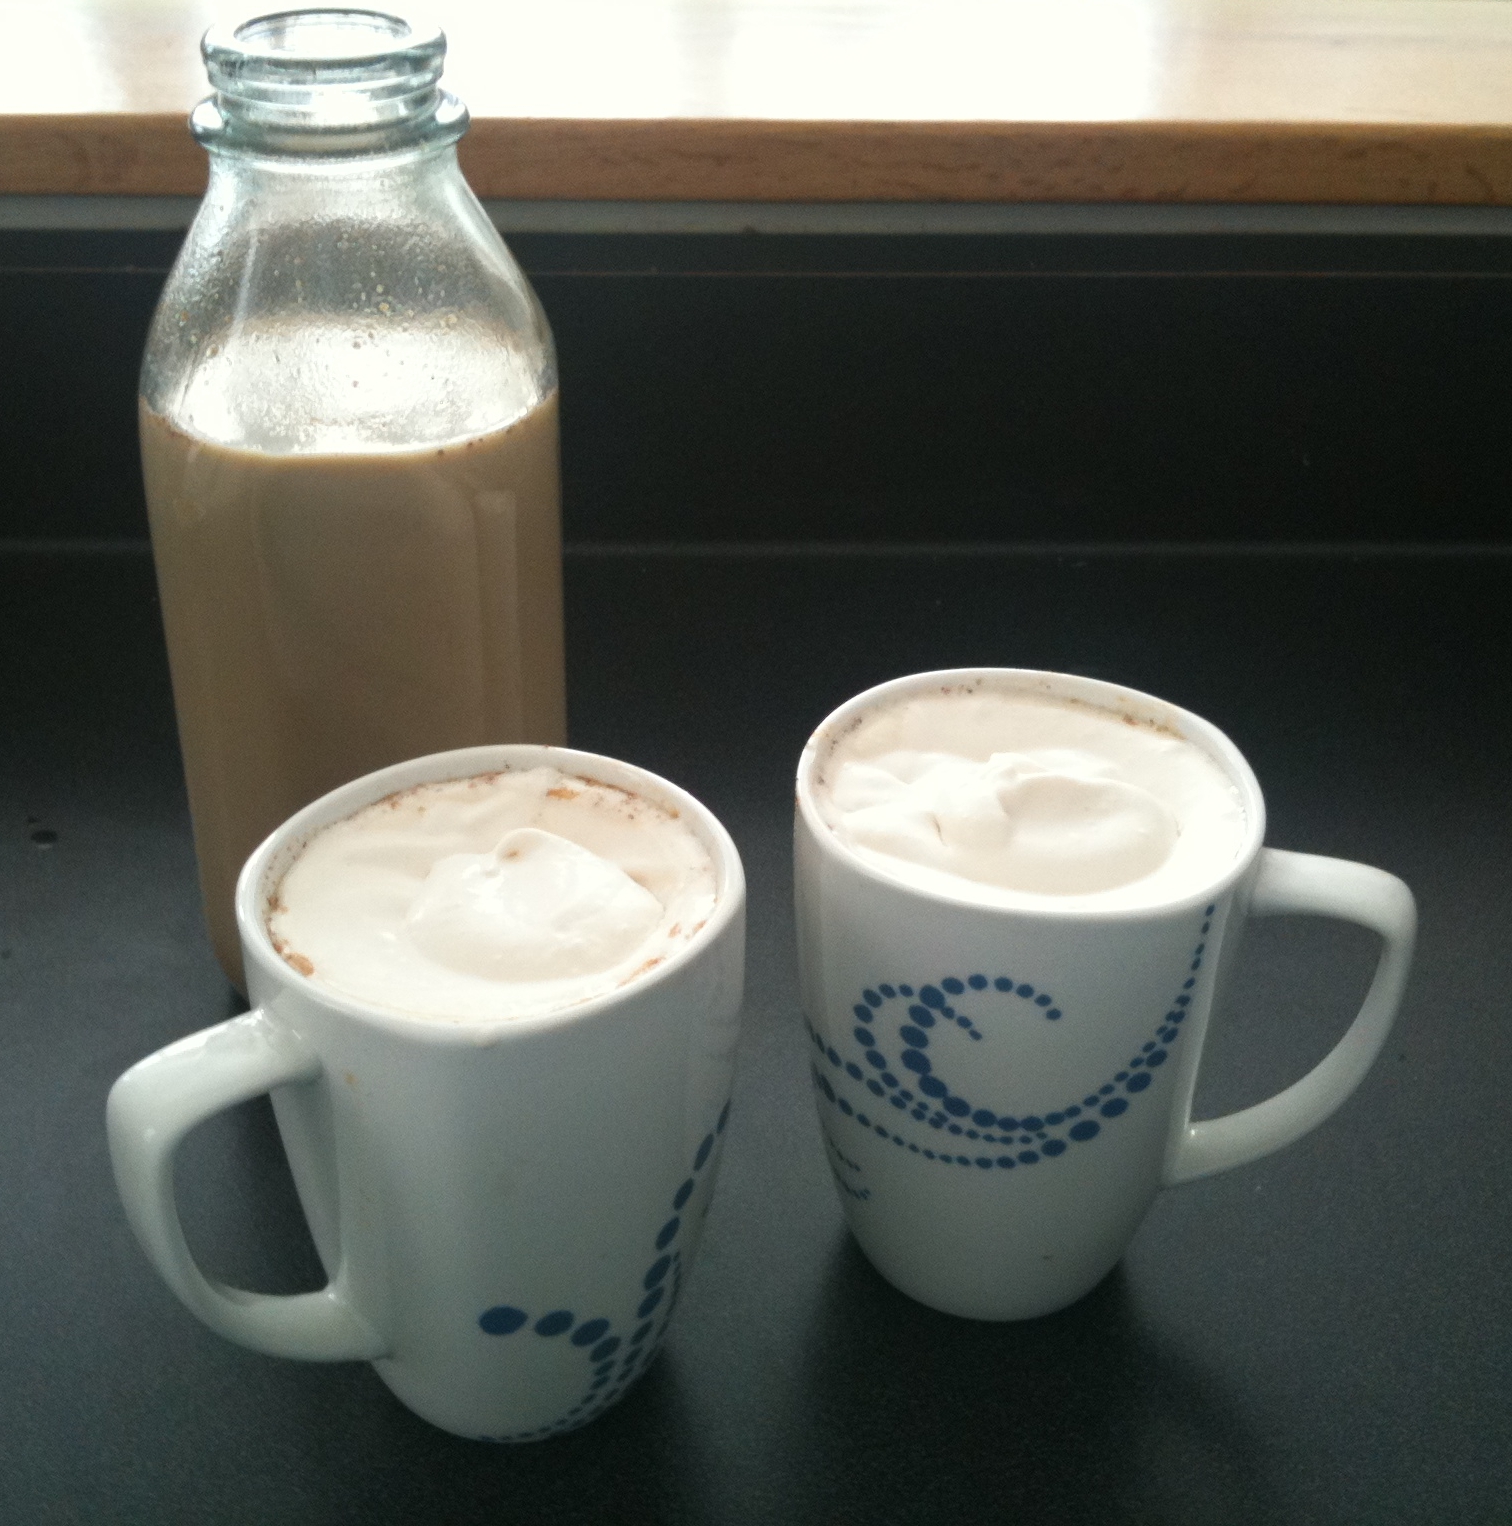 Homemade pumpkin spice lattes with whipped cream